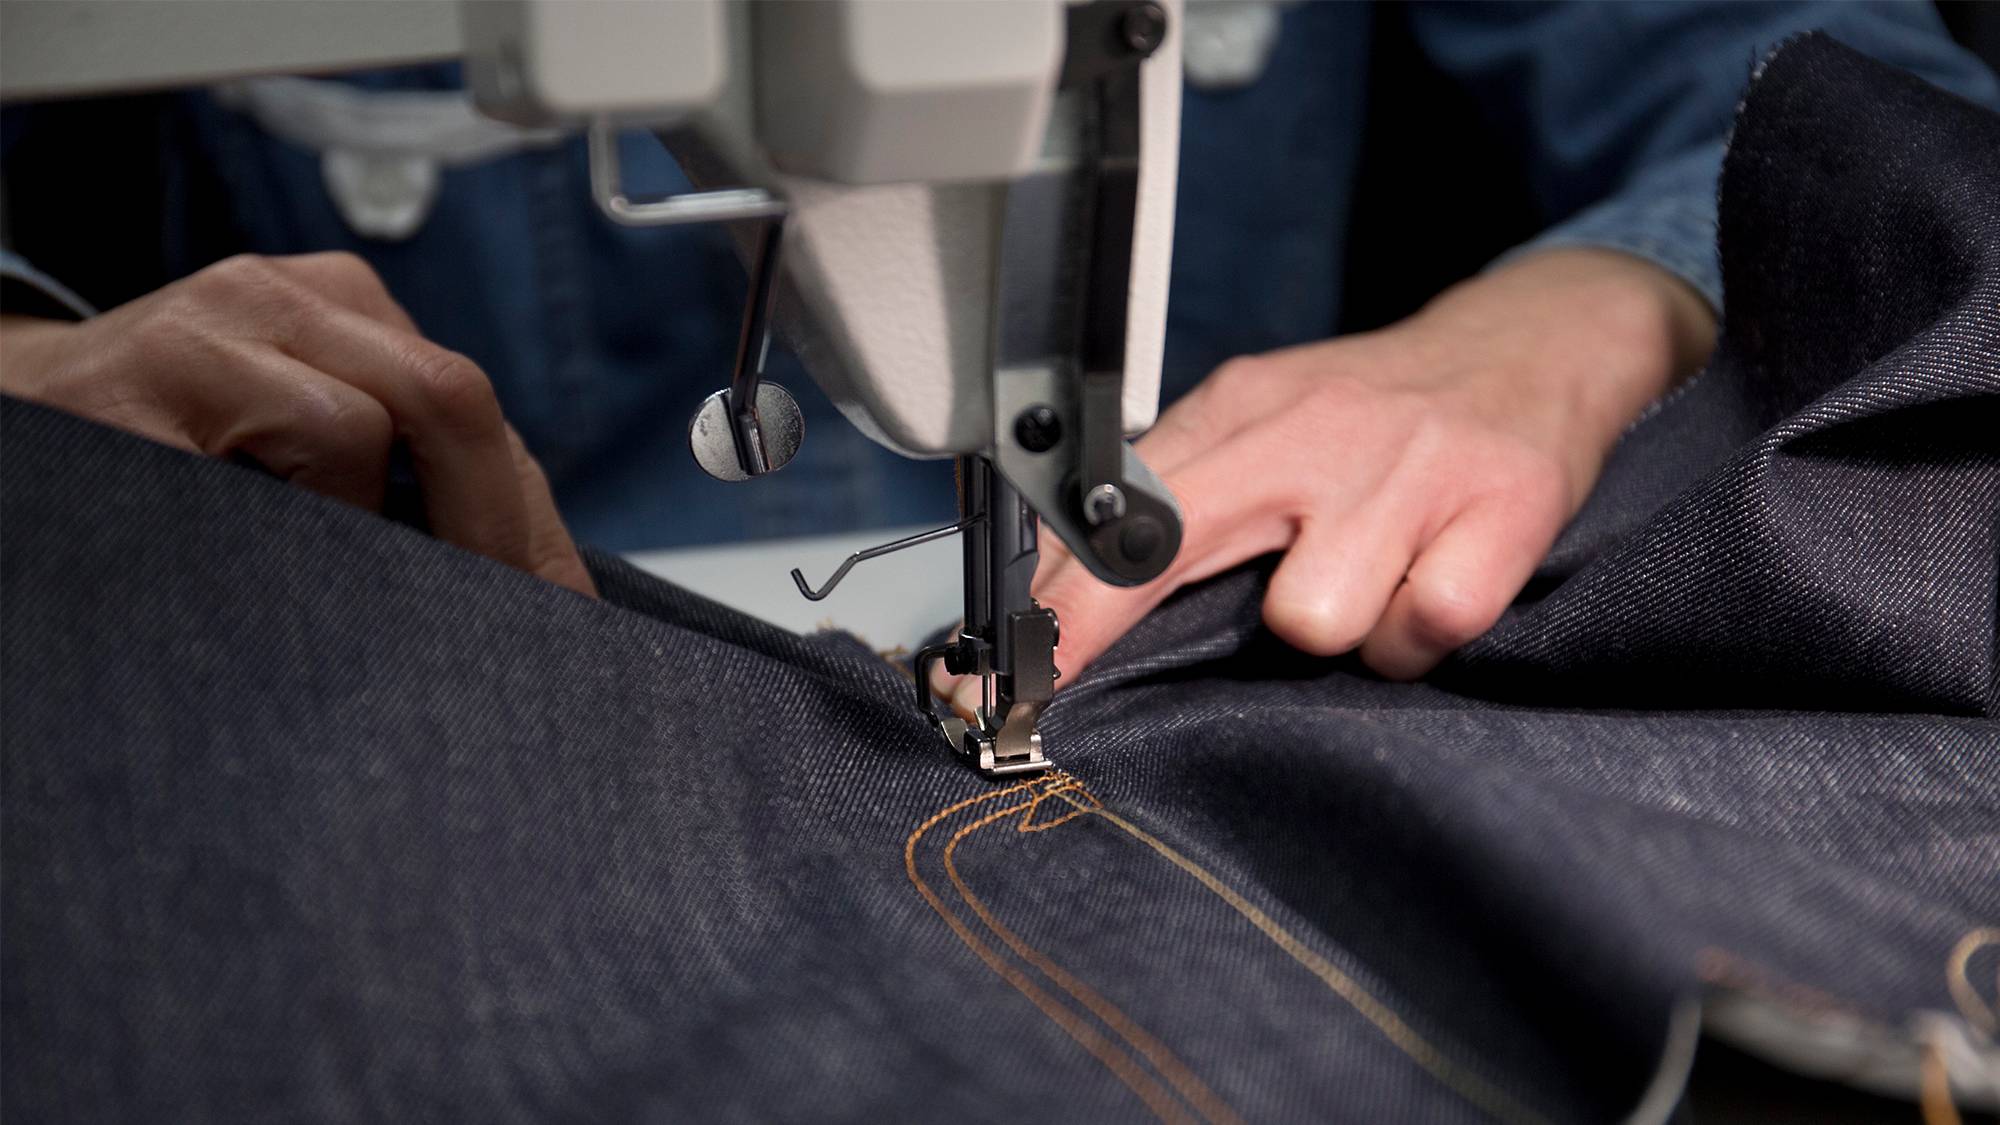 sewing jeans